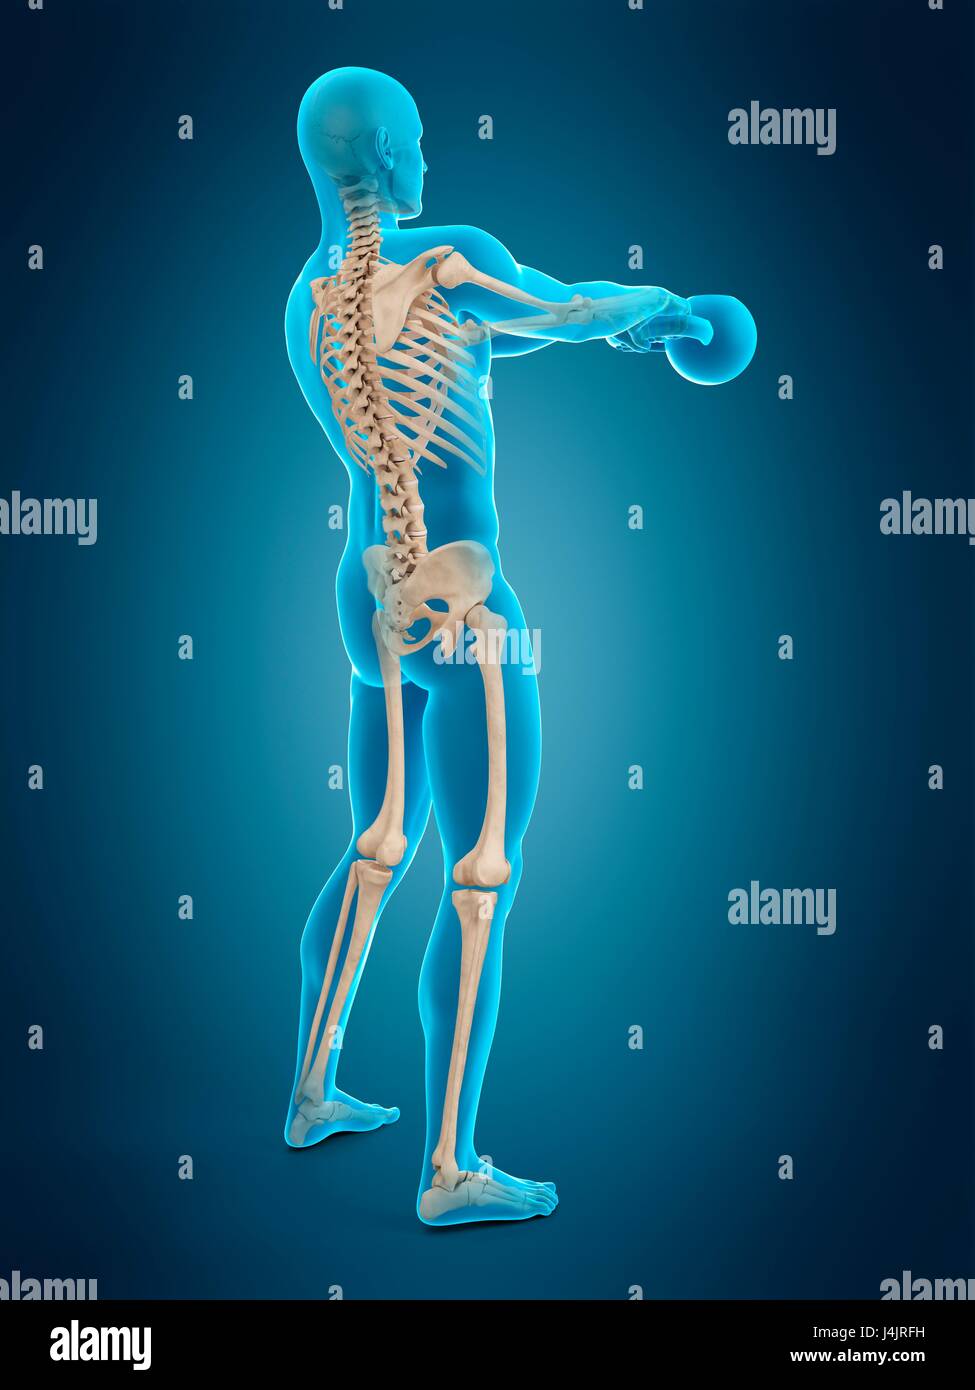 Skeletal structure of person swinging kettle bell, illustration Stock ...